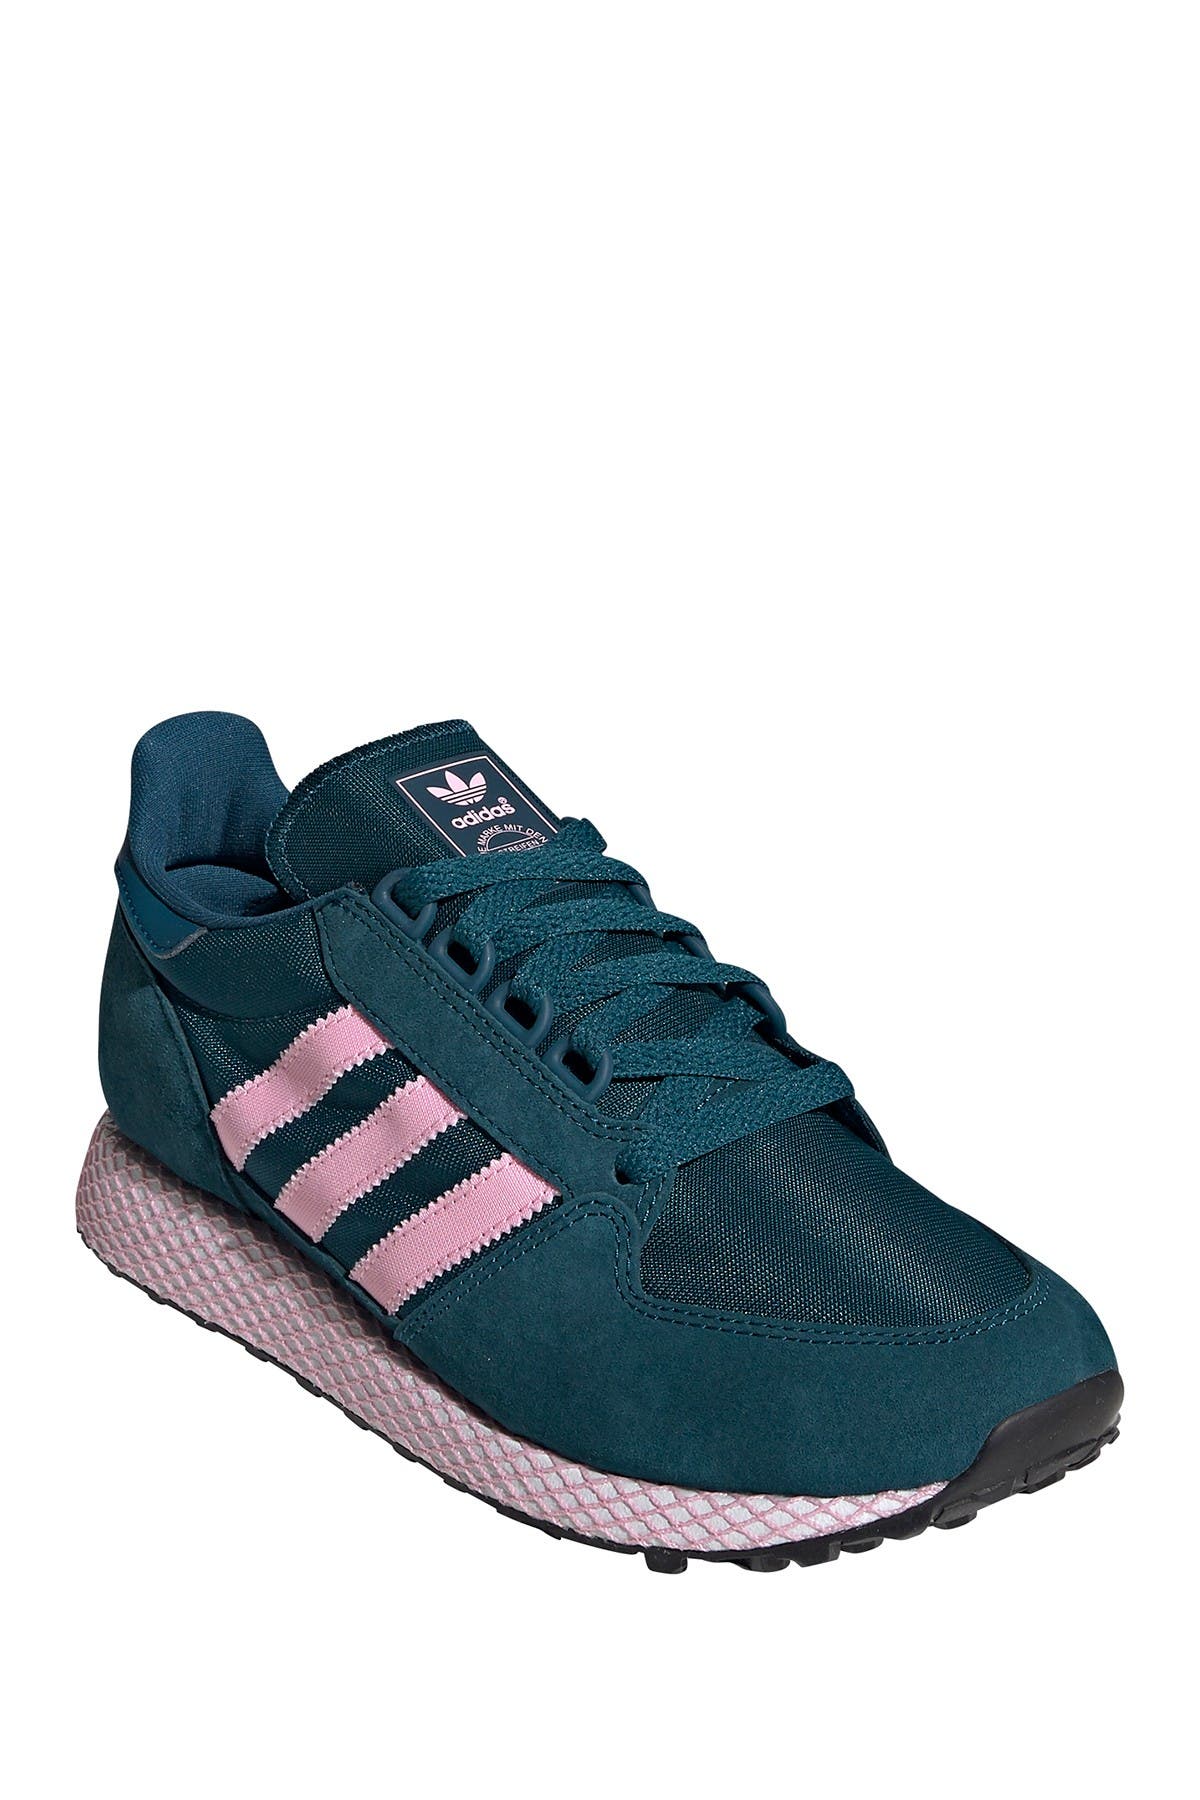 adidas forest grove pink